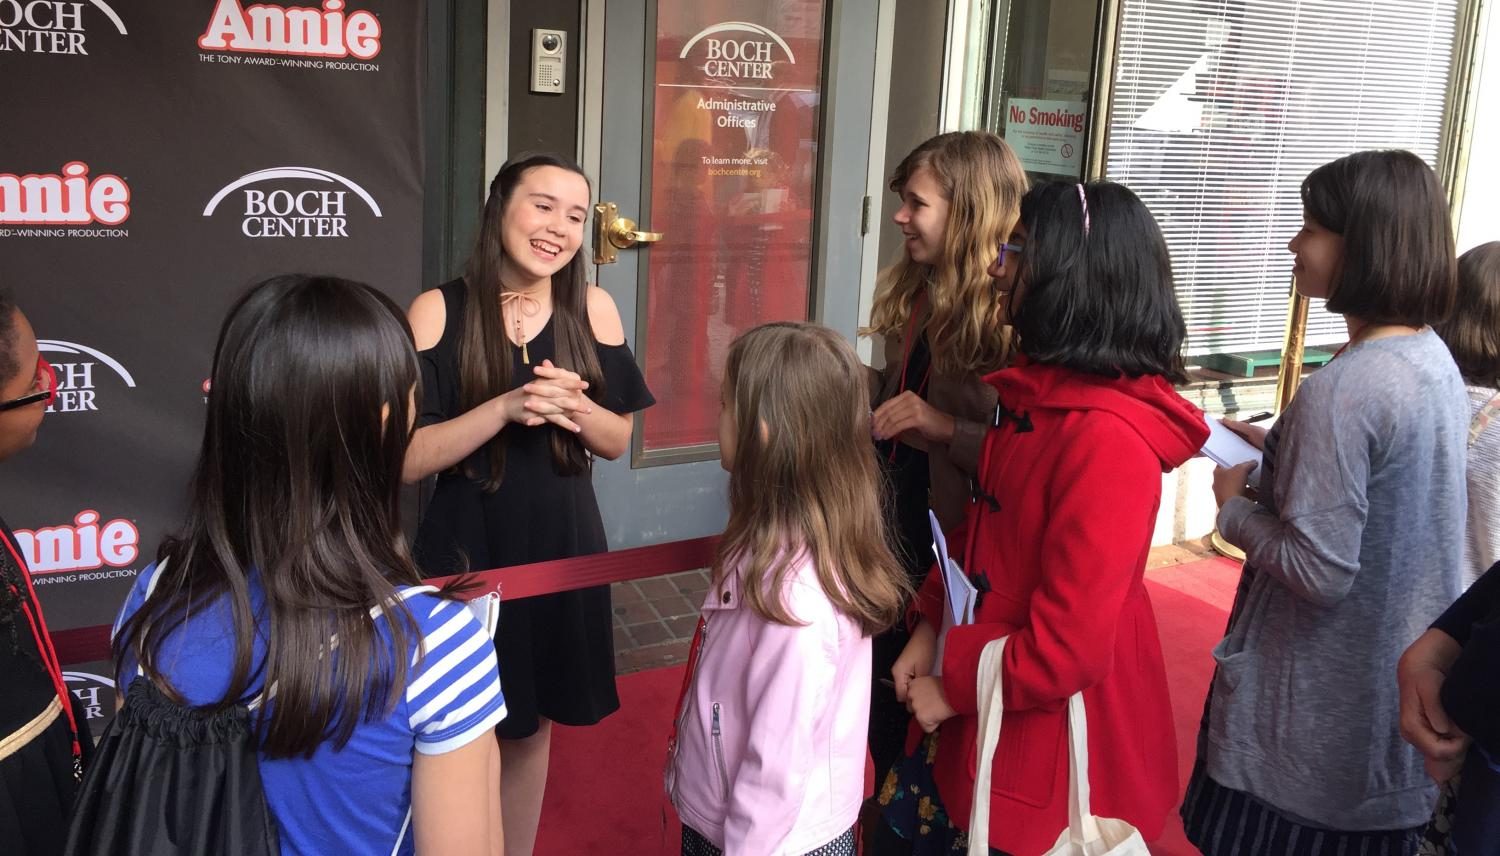 Angelina Carballo, who has the lead role in Annie, talks with reporters on the red carpet outside the Boch Center/Wang Theatre before the show May 10, 2017.